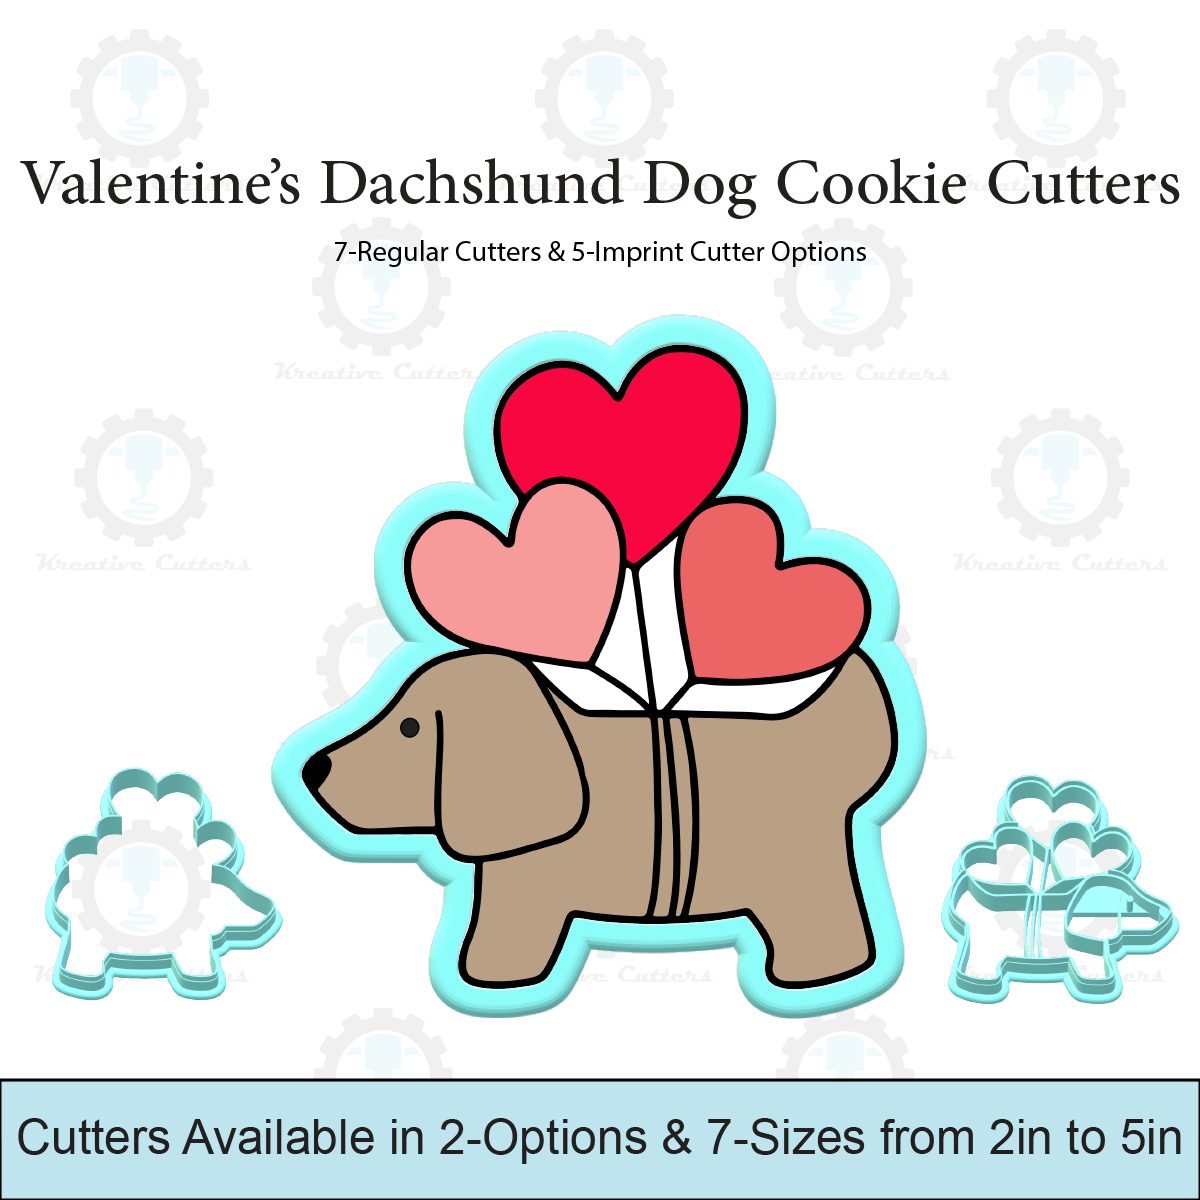 Valentines Dachshund Dog Cookie Cutters | With Imprint Cutter Option